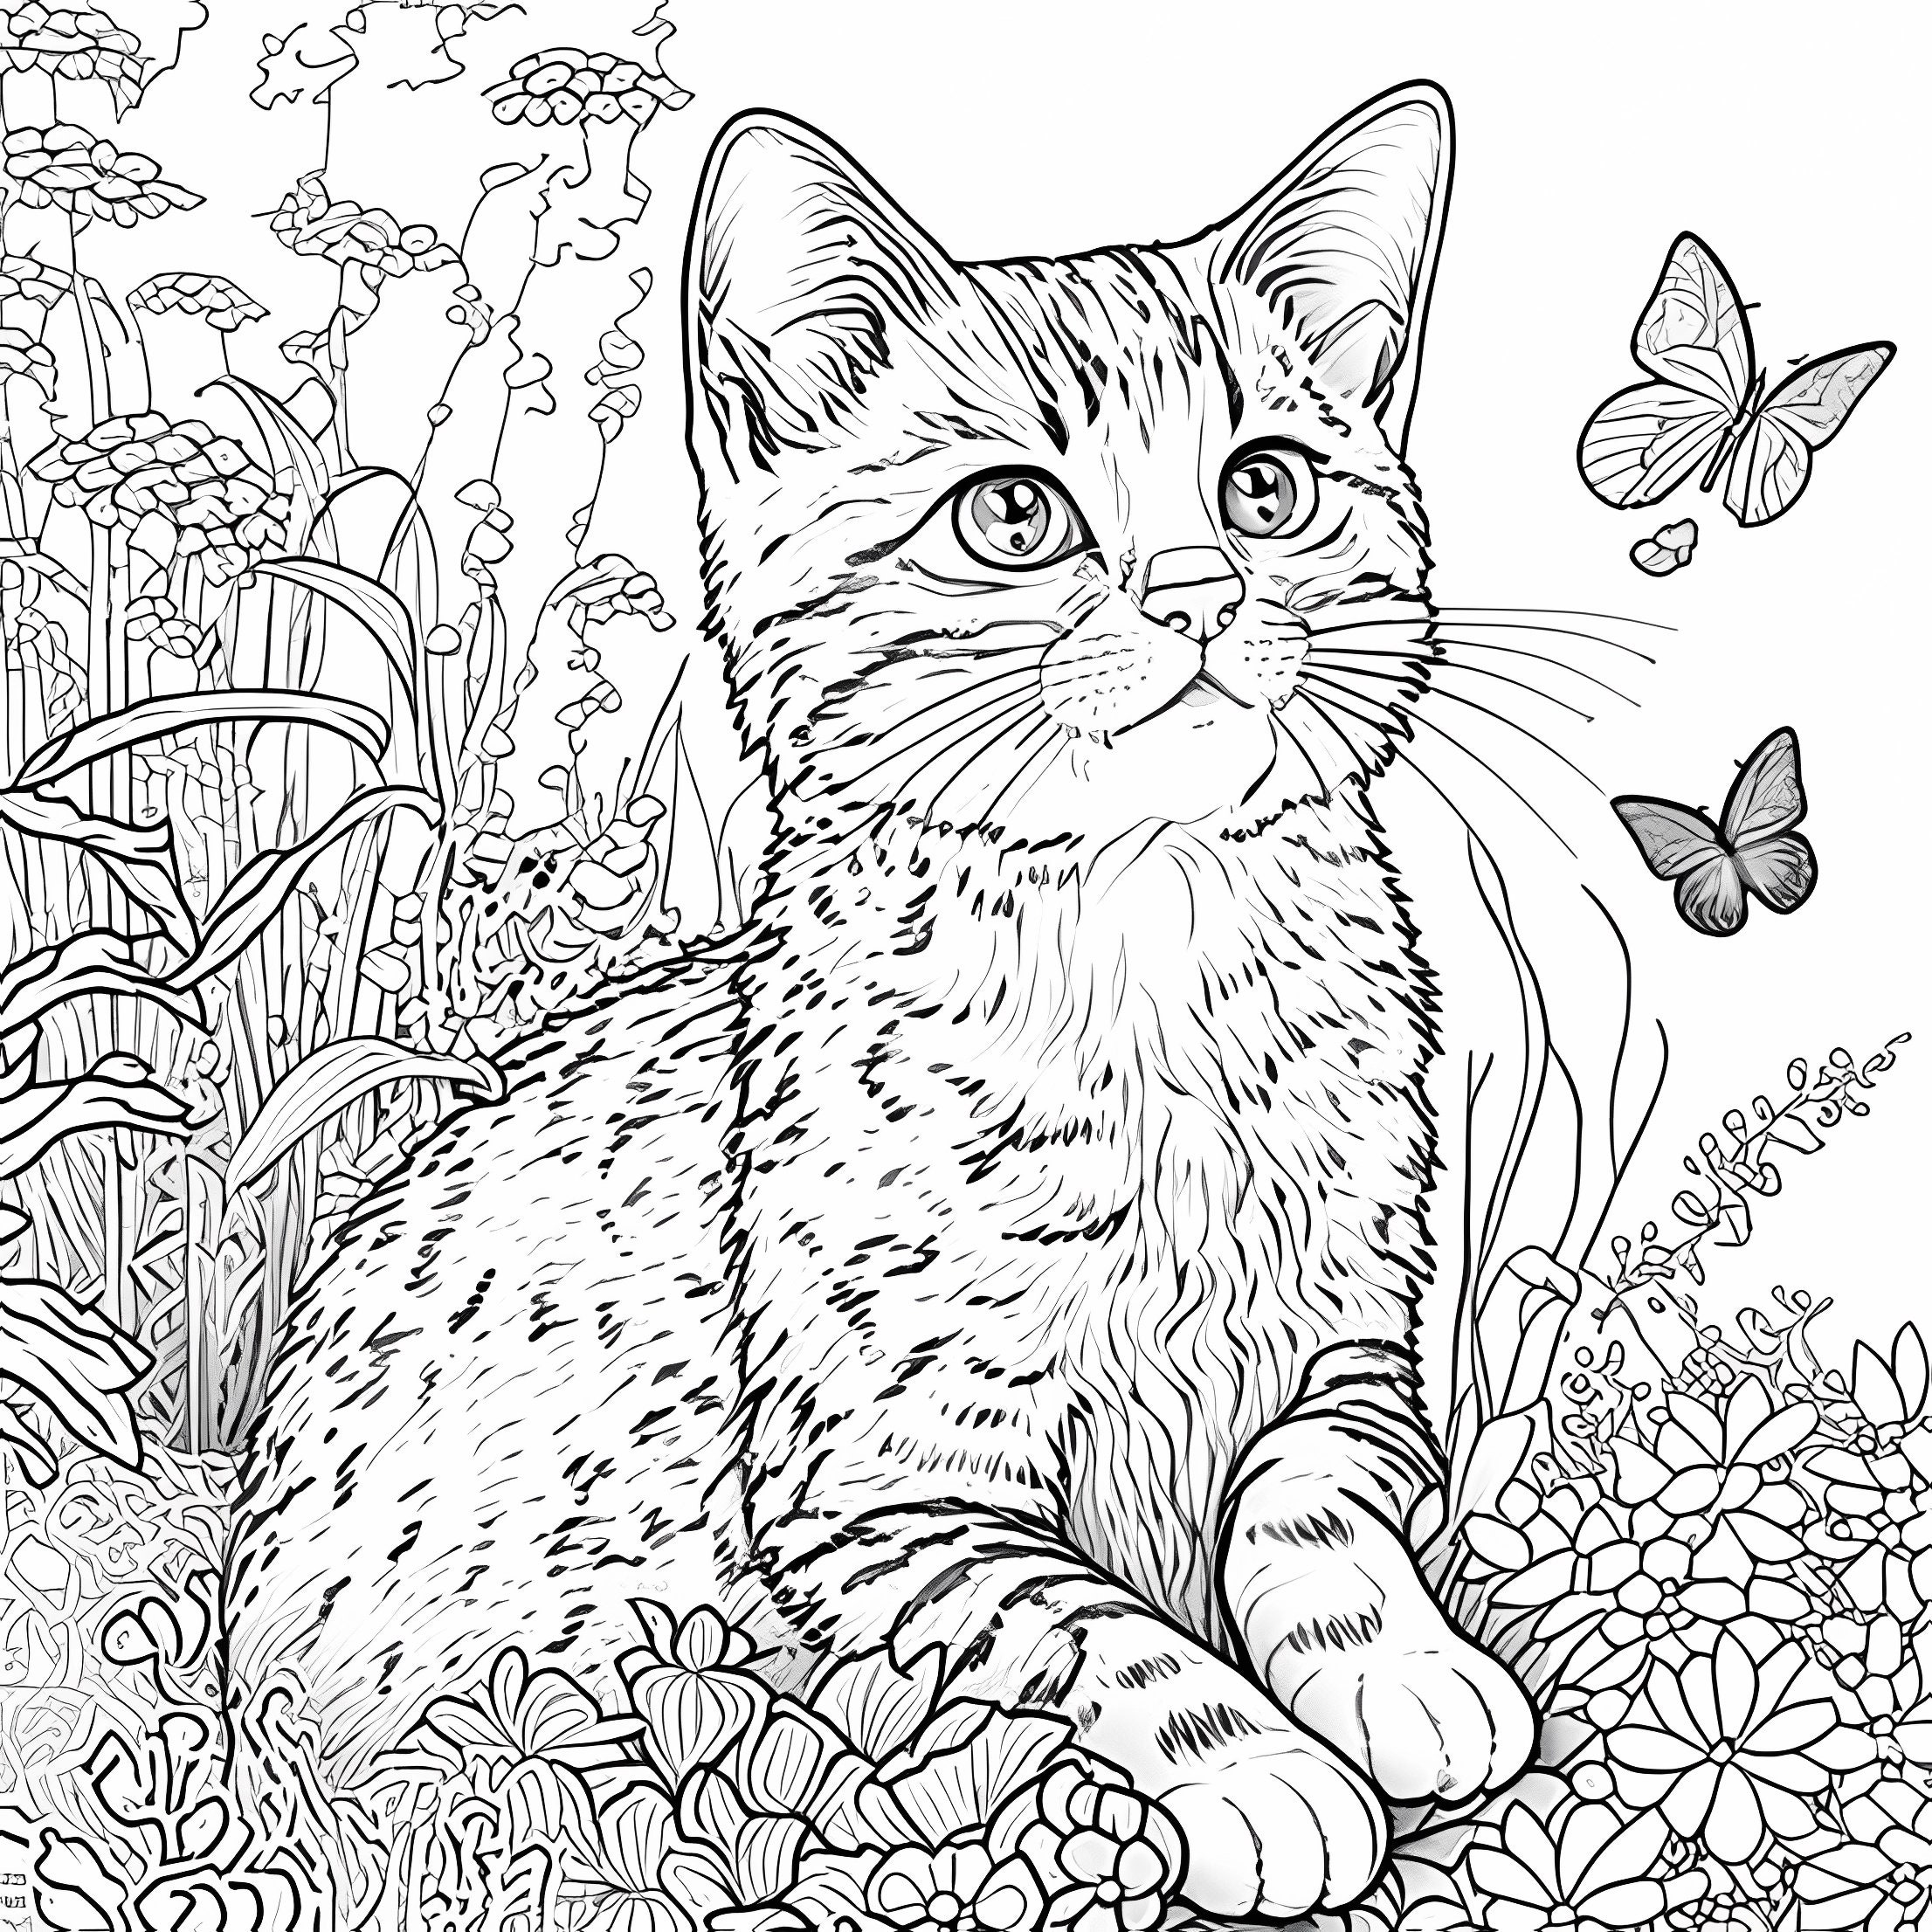 4+ Thousand Coloring Pages Animal Royalty-Free Images, Stock Photos &  Pictures